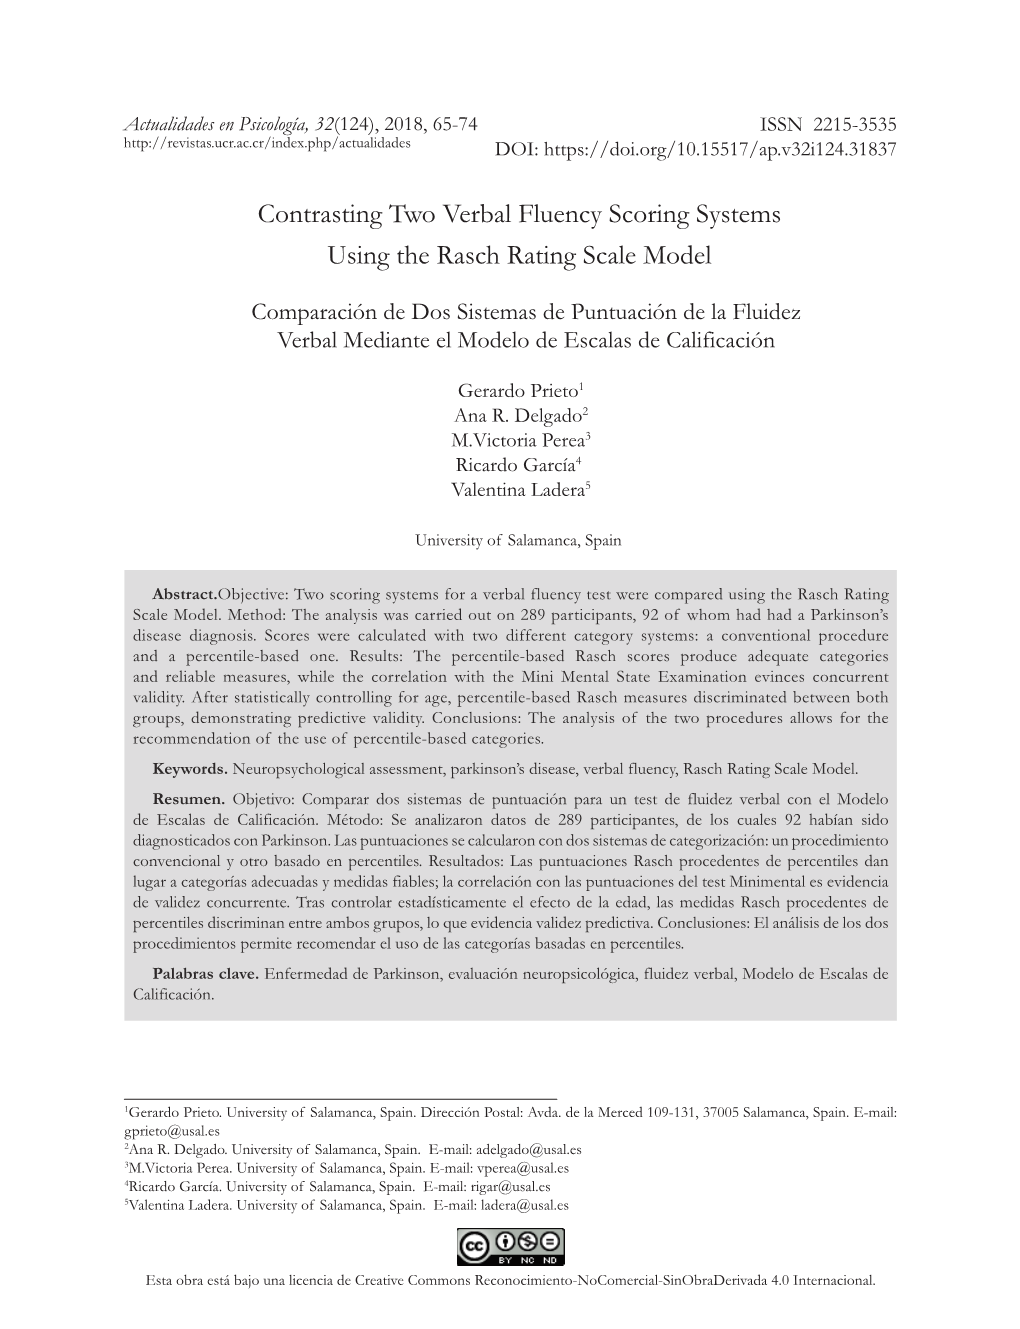 Contrasting Two Verbal Fluency Scoring Systems Using the Rasch Rating Scale Model